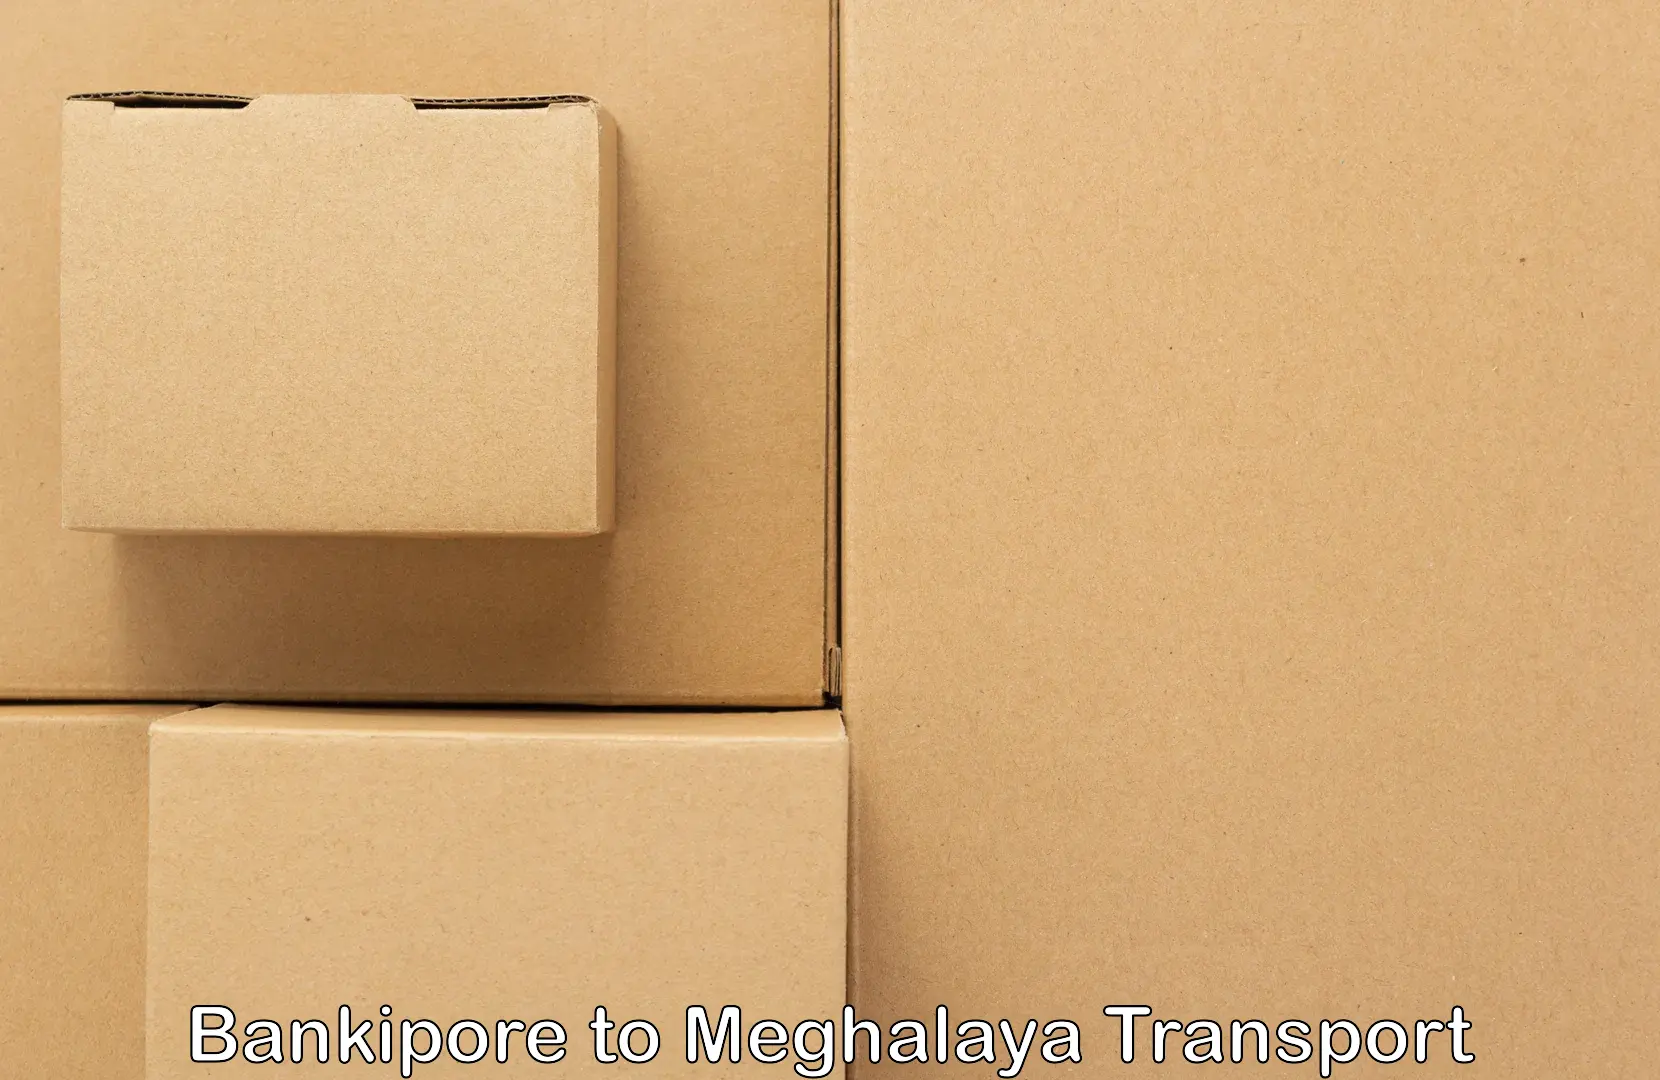 Lorry transport service Bankipore to Dkhiah West